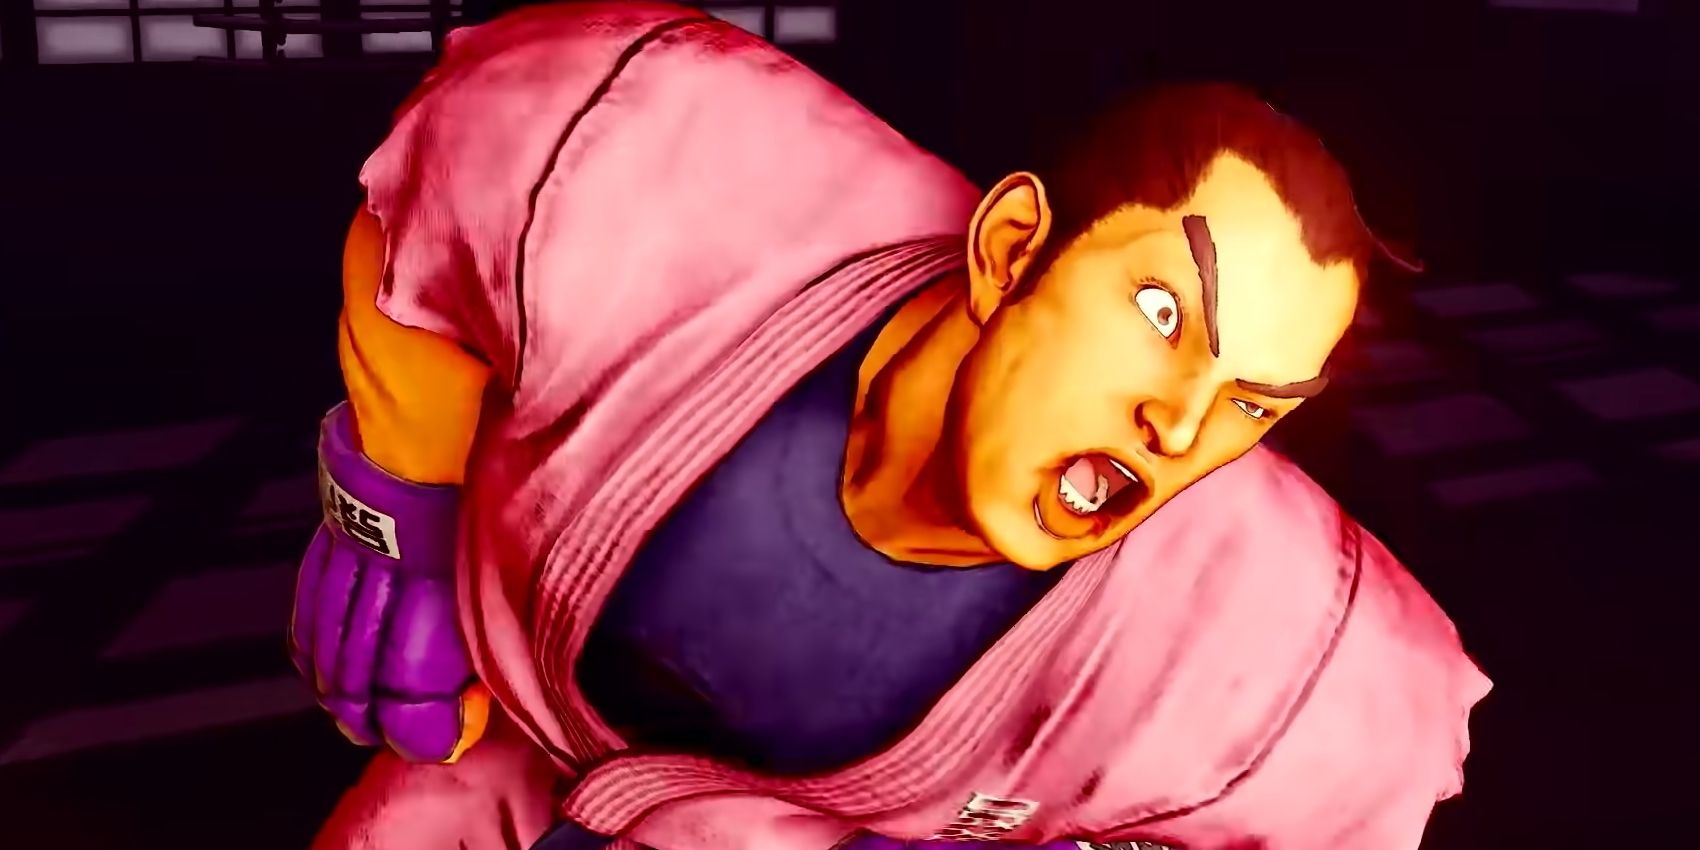 Street Fighter 5's Dan being a goofball and mugging for the camera